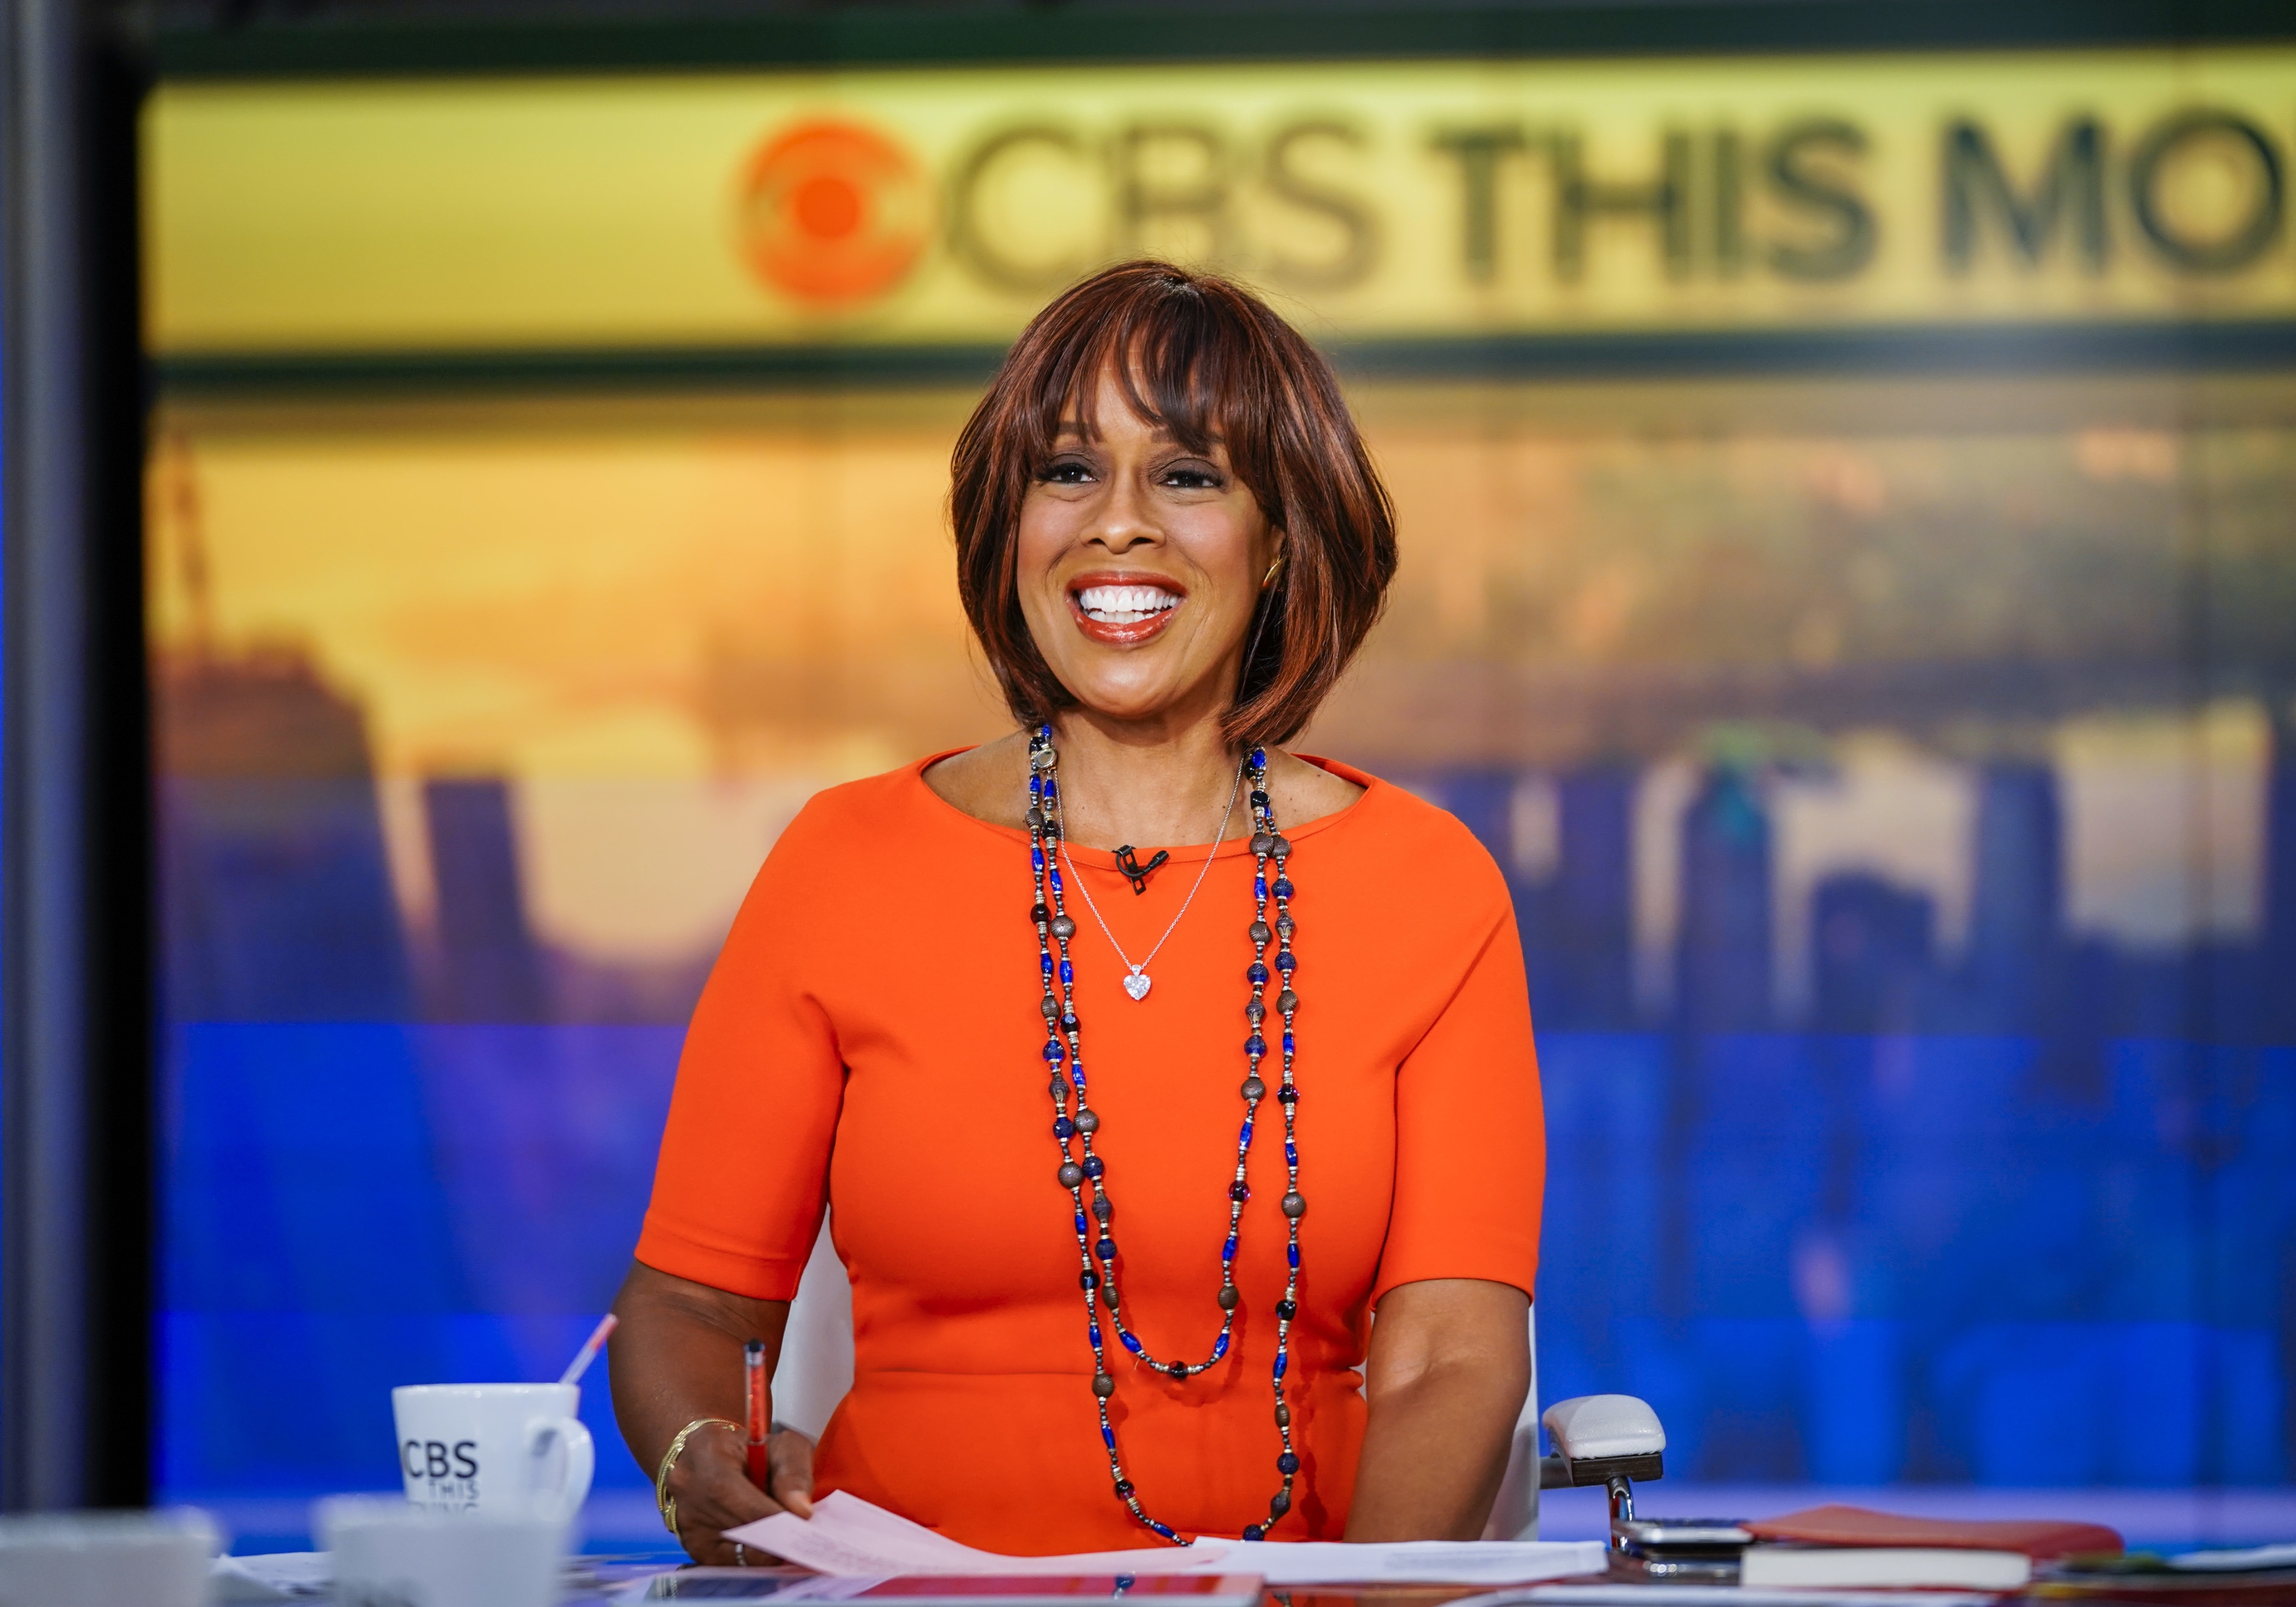 Michele Crowe/CBS via Getty Images